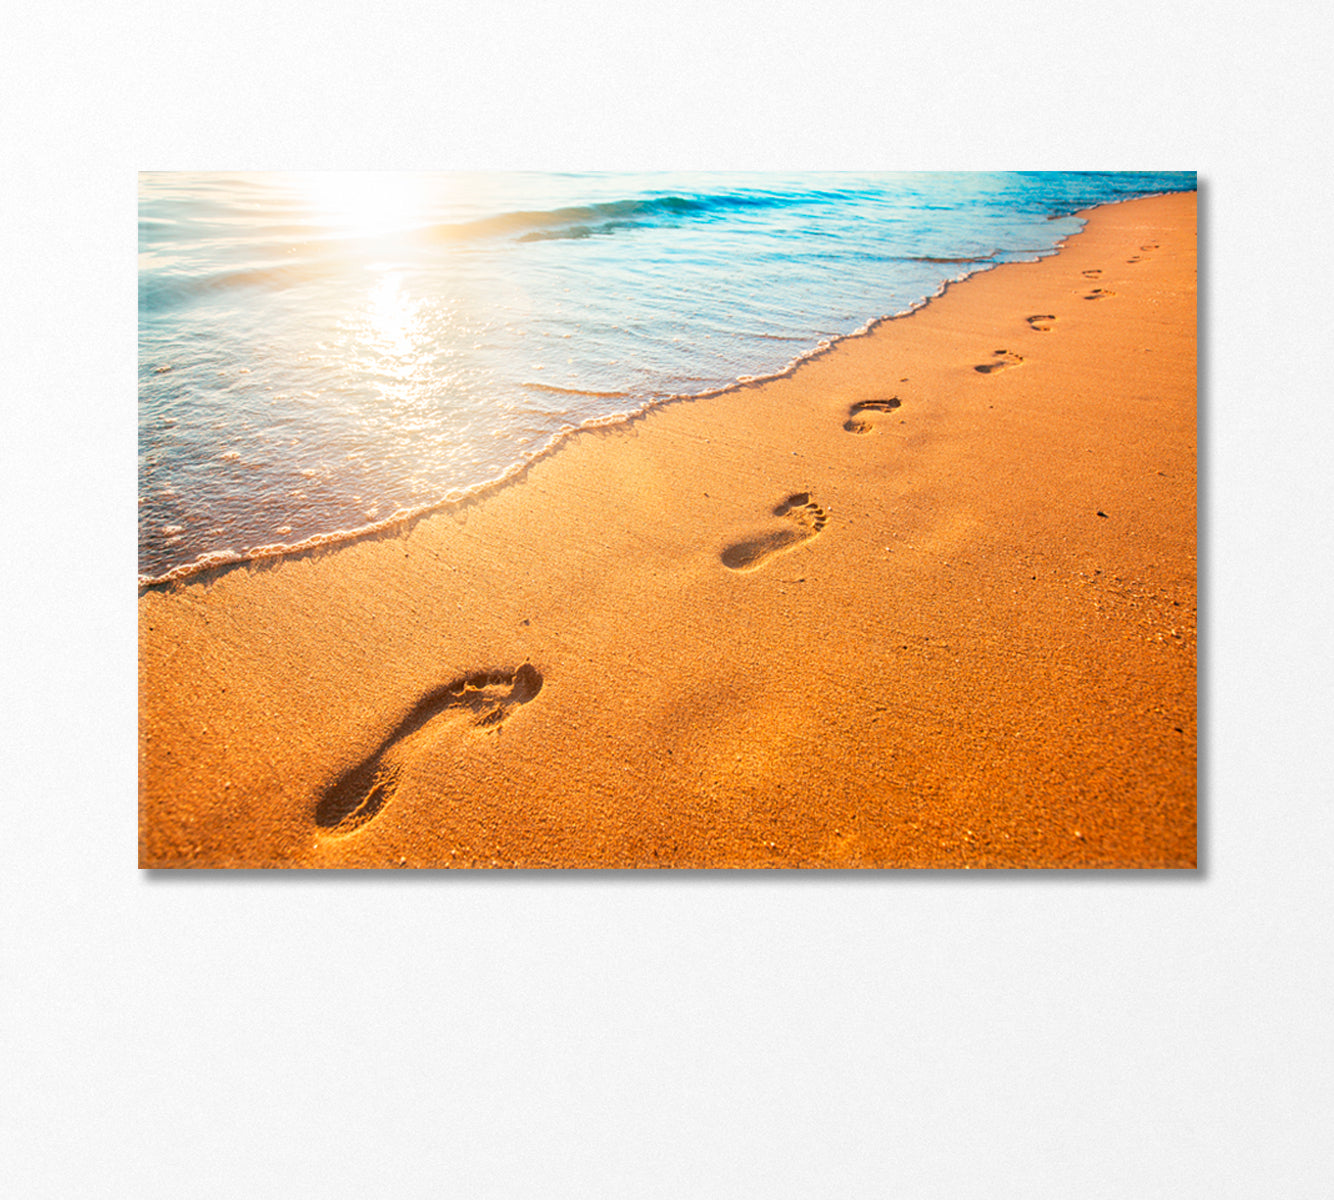 Footprints in the Sand Beach During Sunset Canvas Print-Canvas Print-CetArt-1 Panel-24x16 inches-CetArt